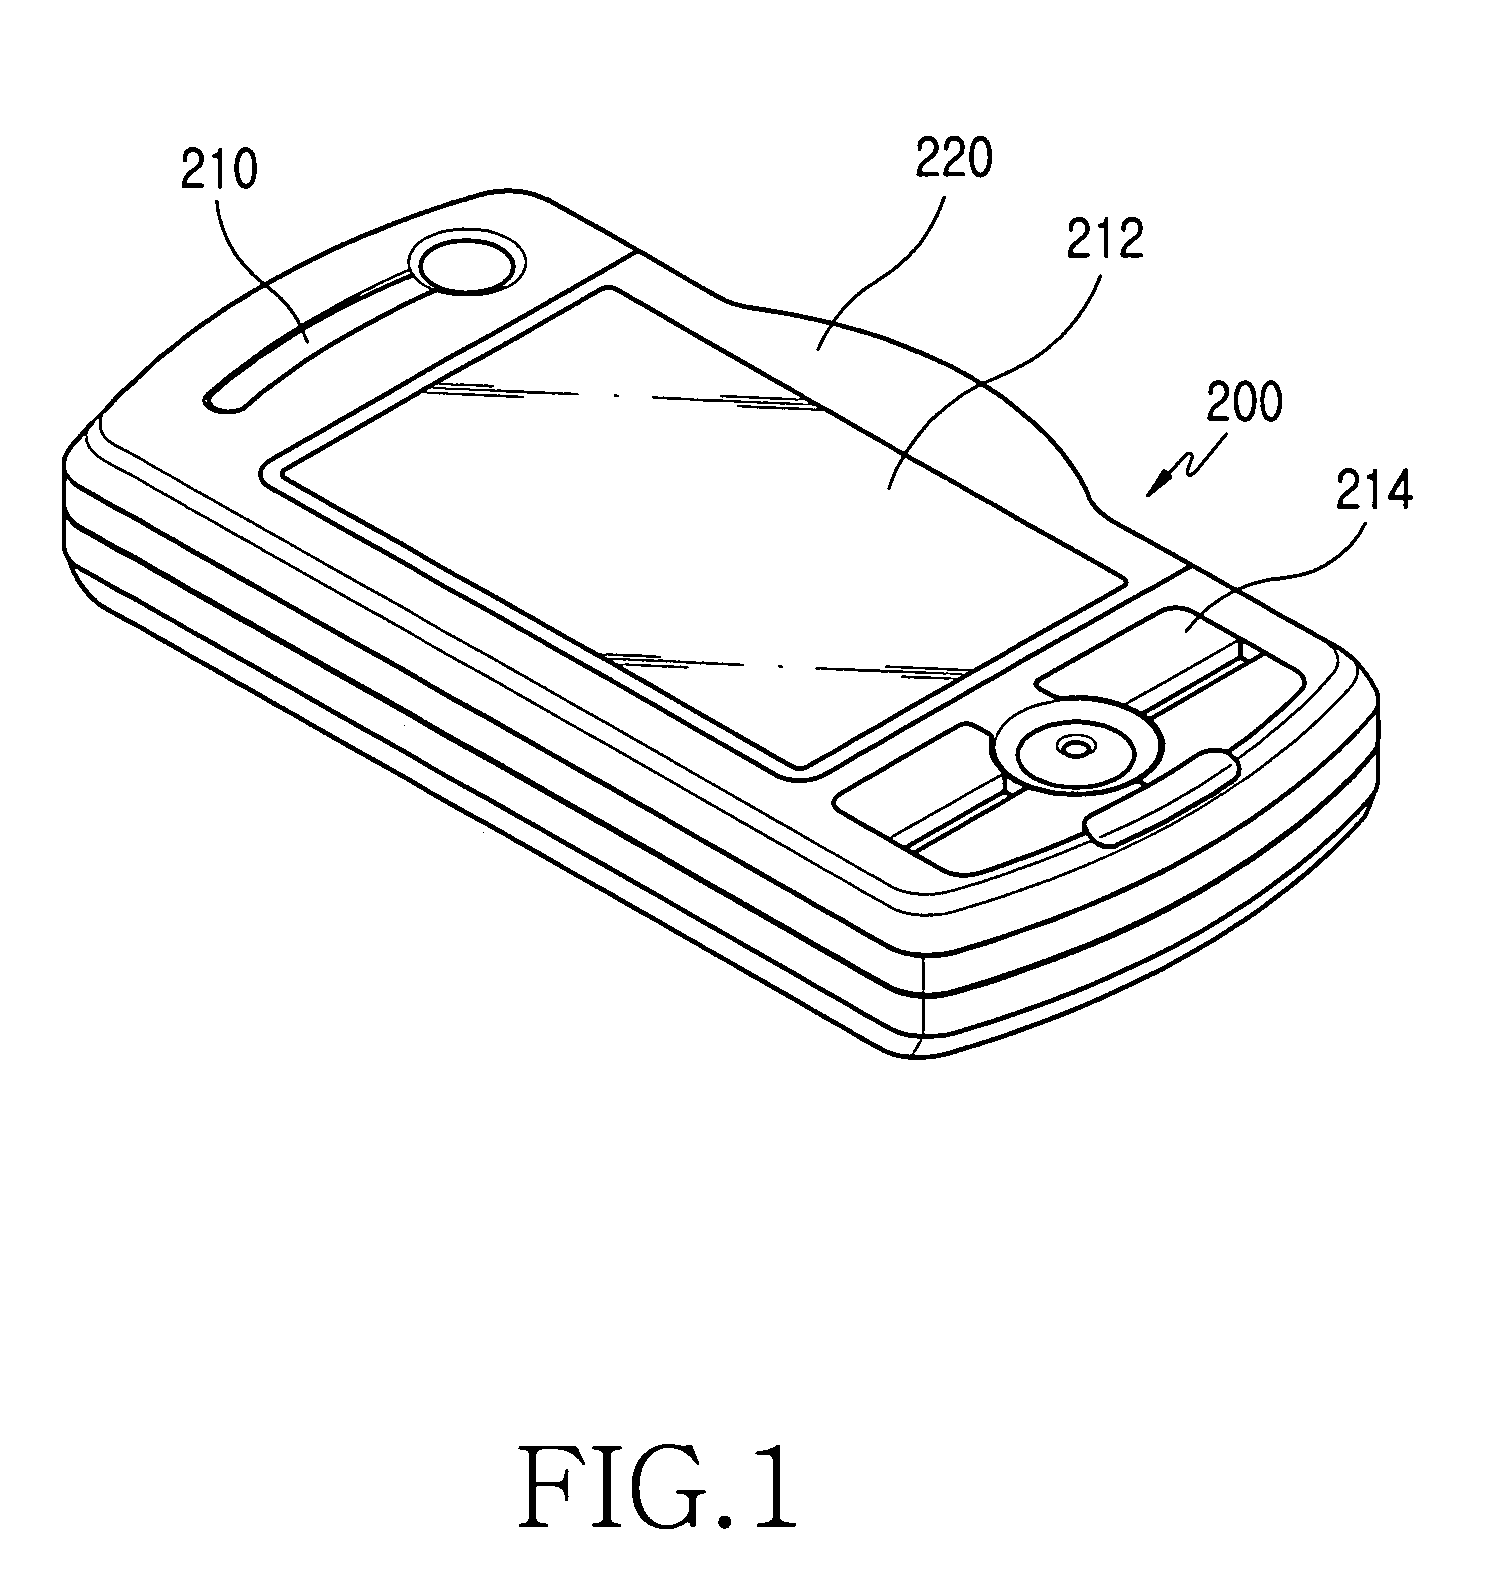 Portable communication terminal having a housing capable of both sliding and swinging